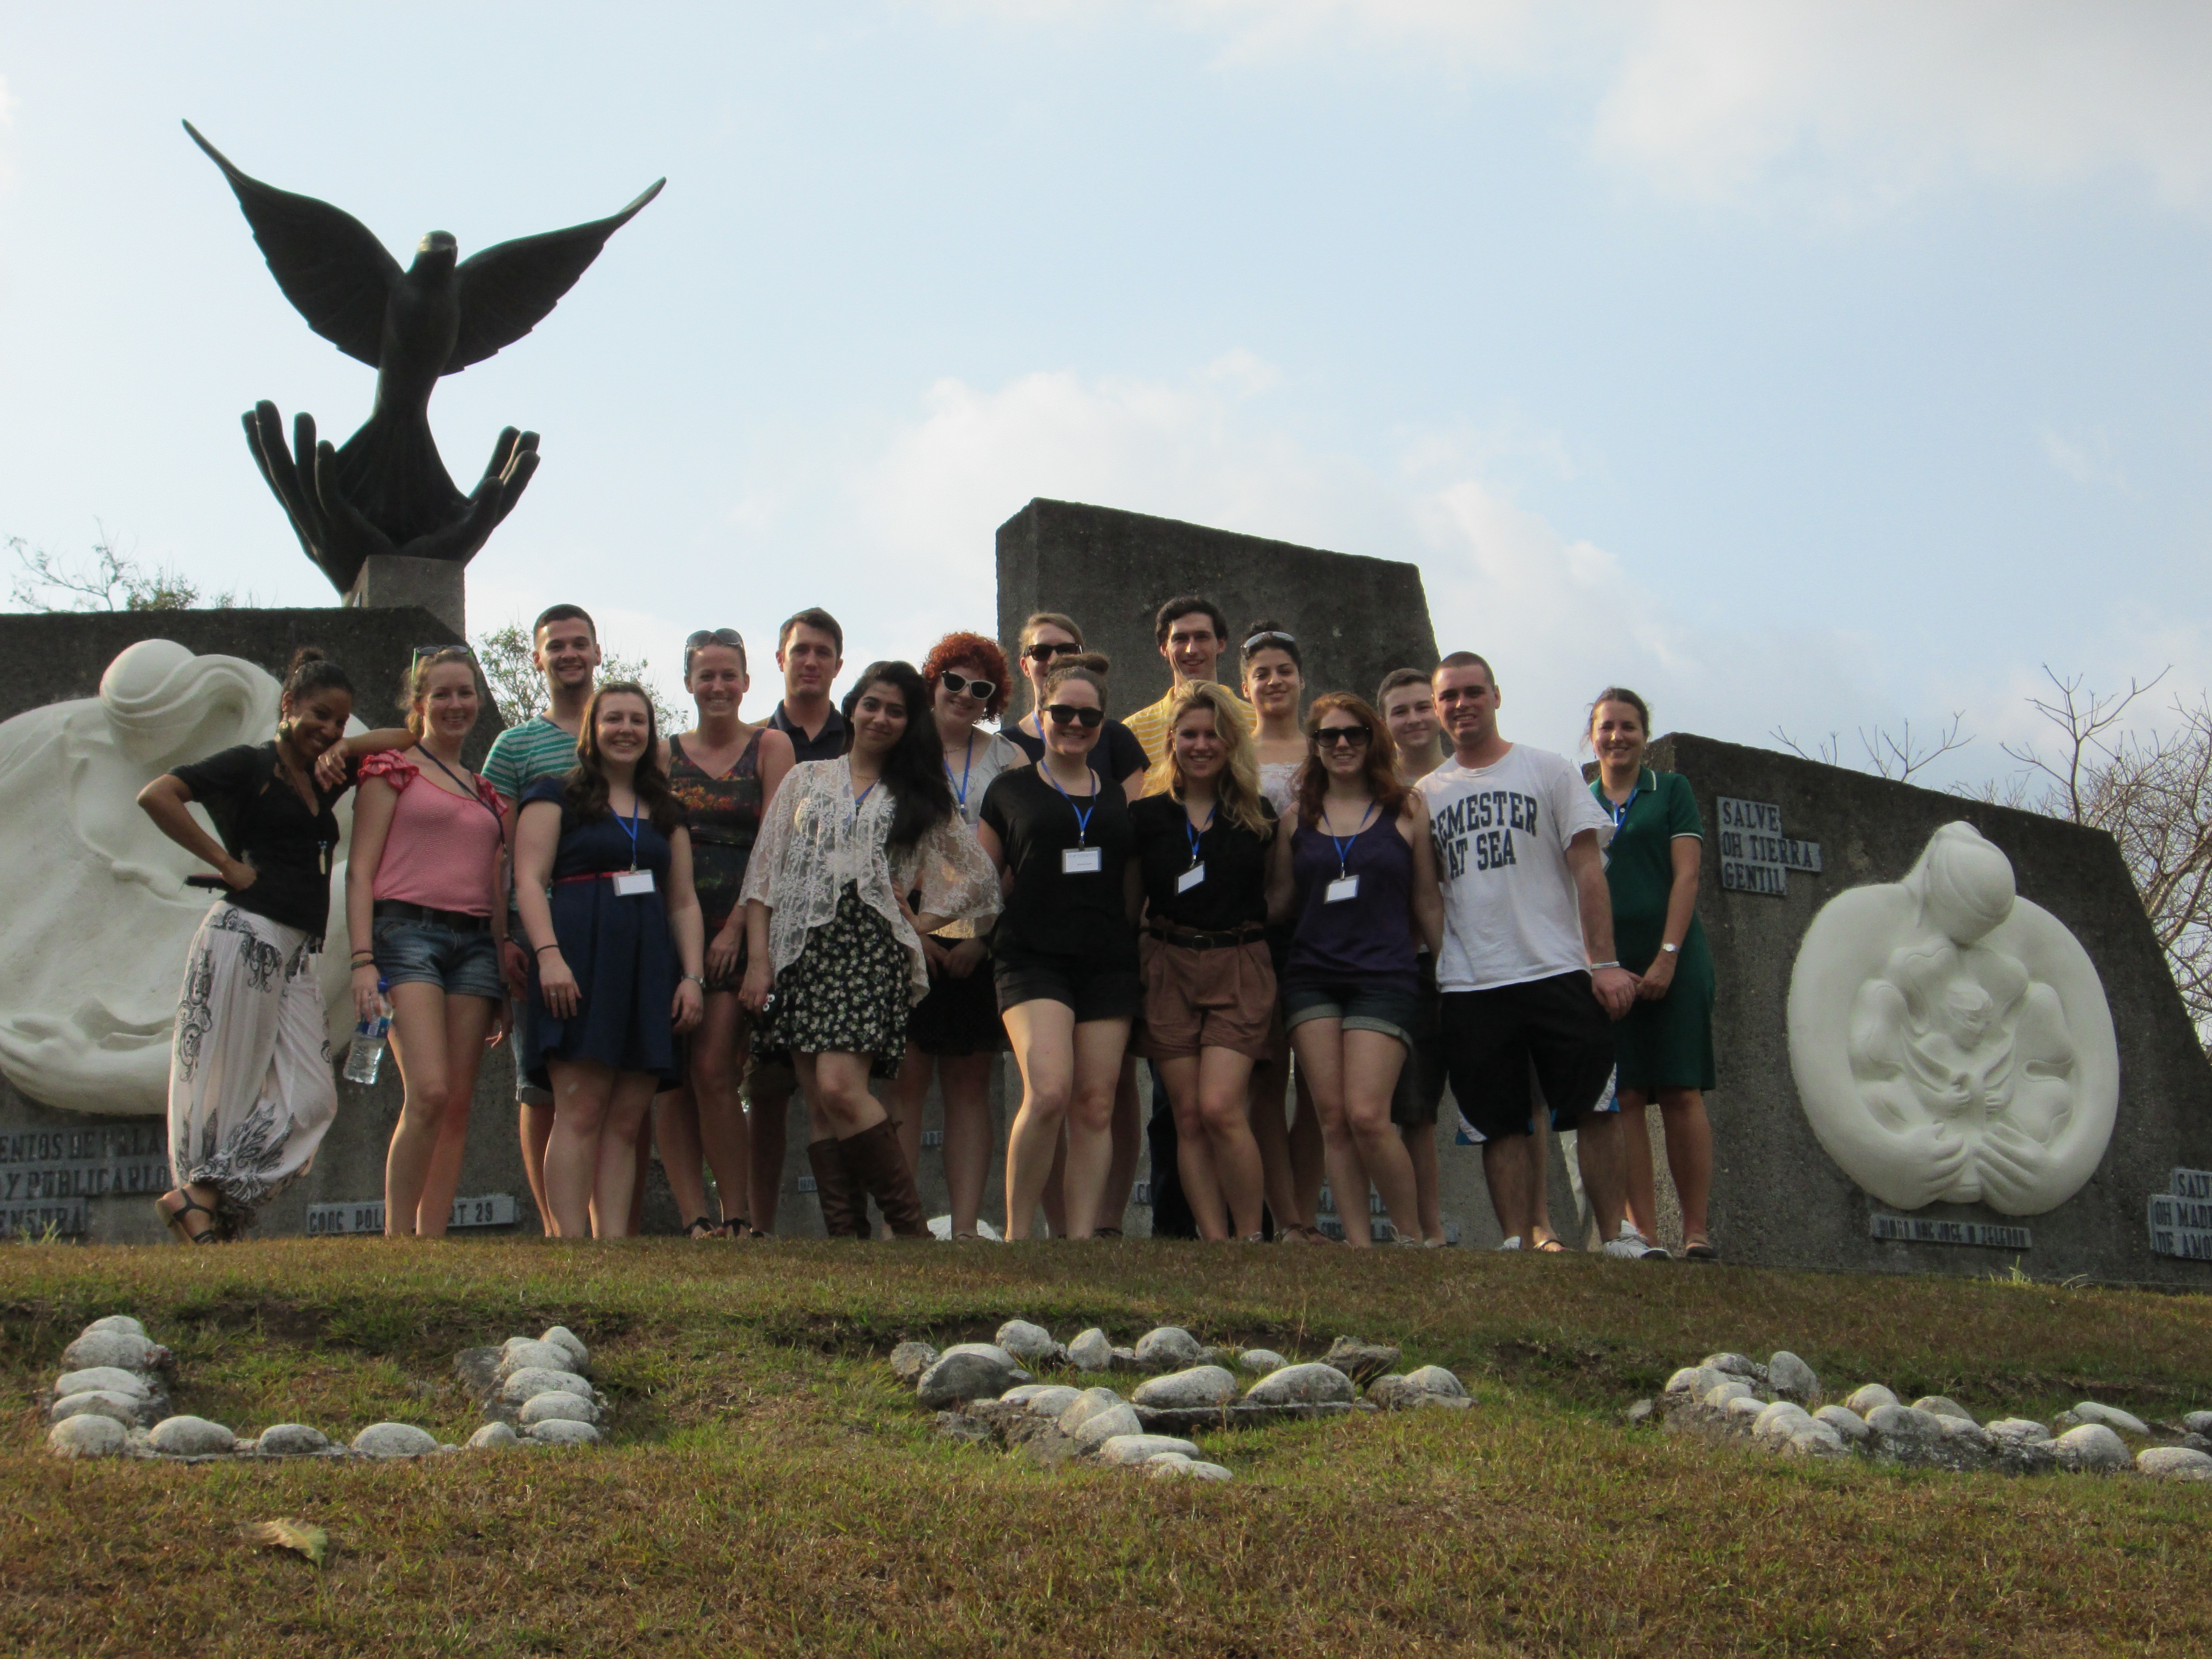 Pace University New York City Model United Nations students at the Monument for Disarmament, Work and Peace on the UN University for Peace's campus in Costa Rica.